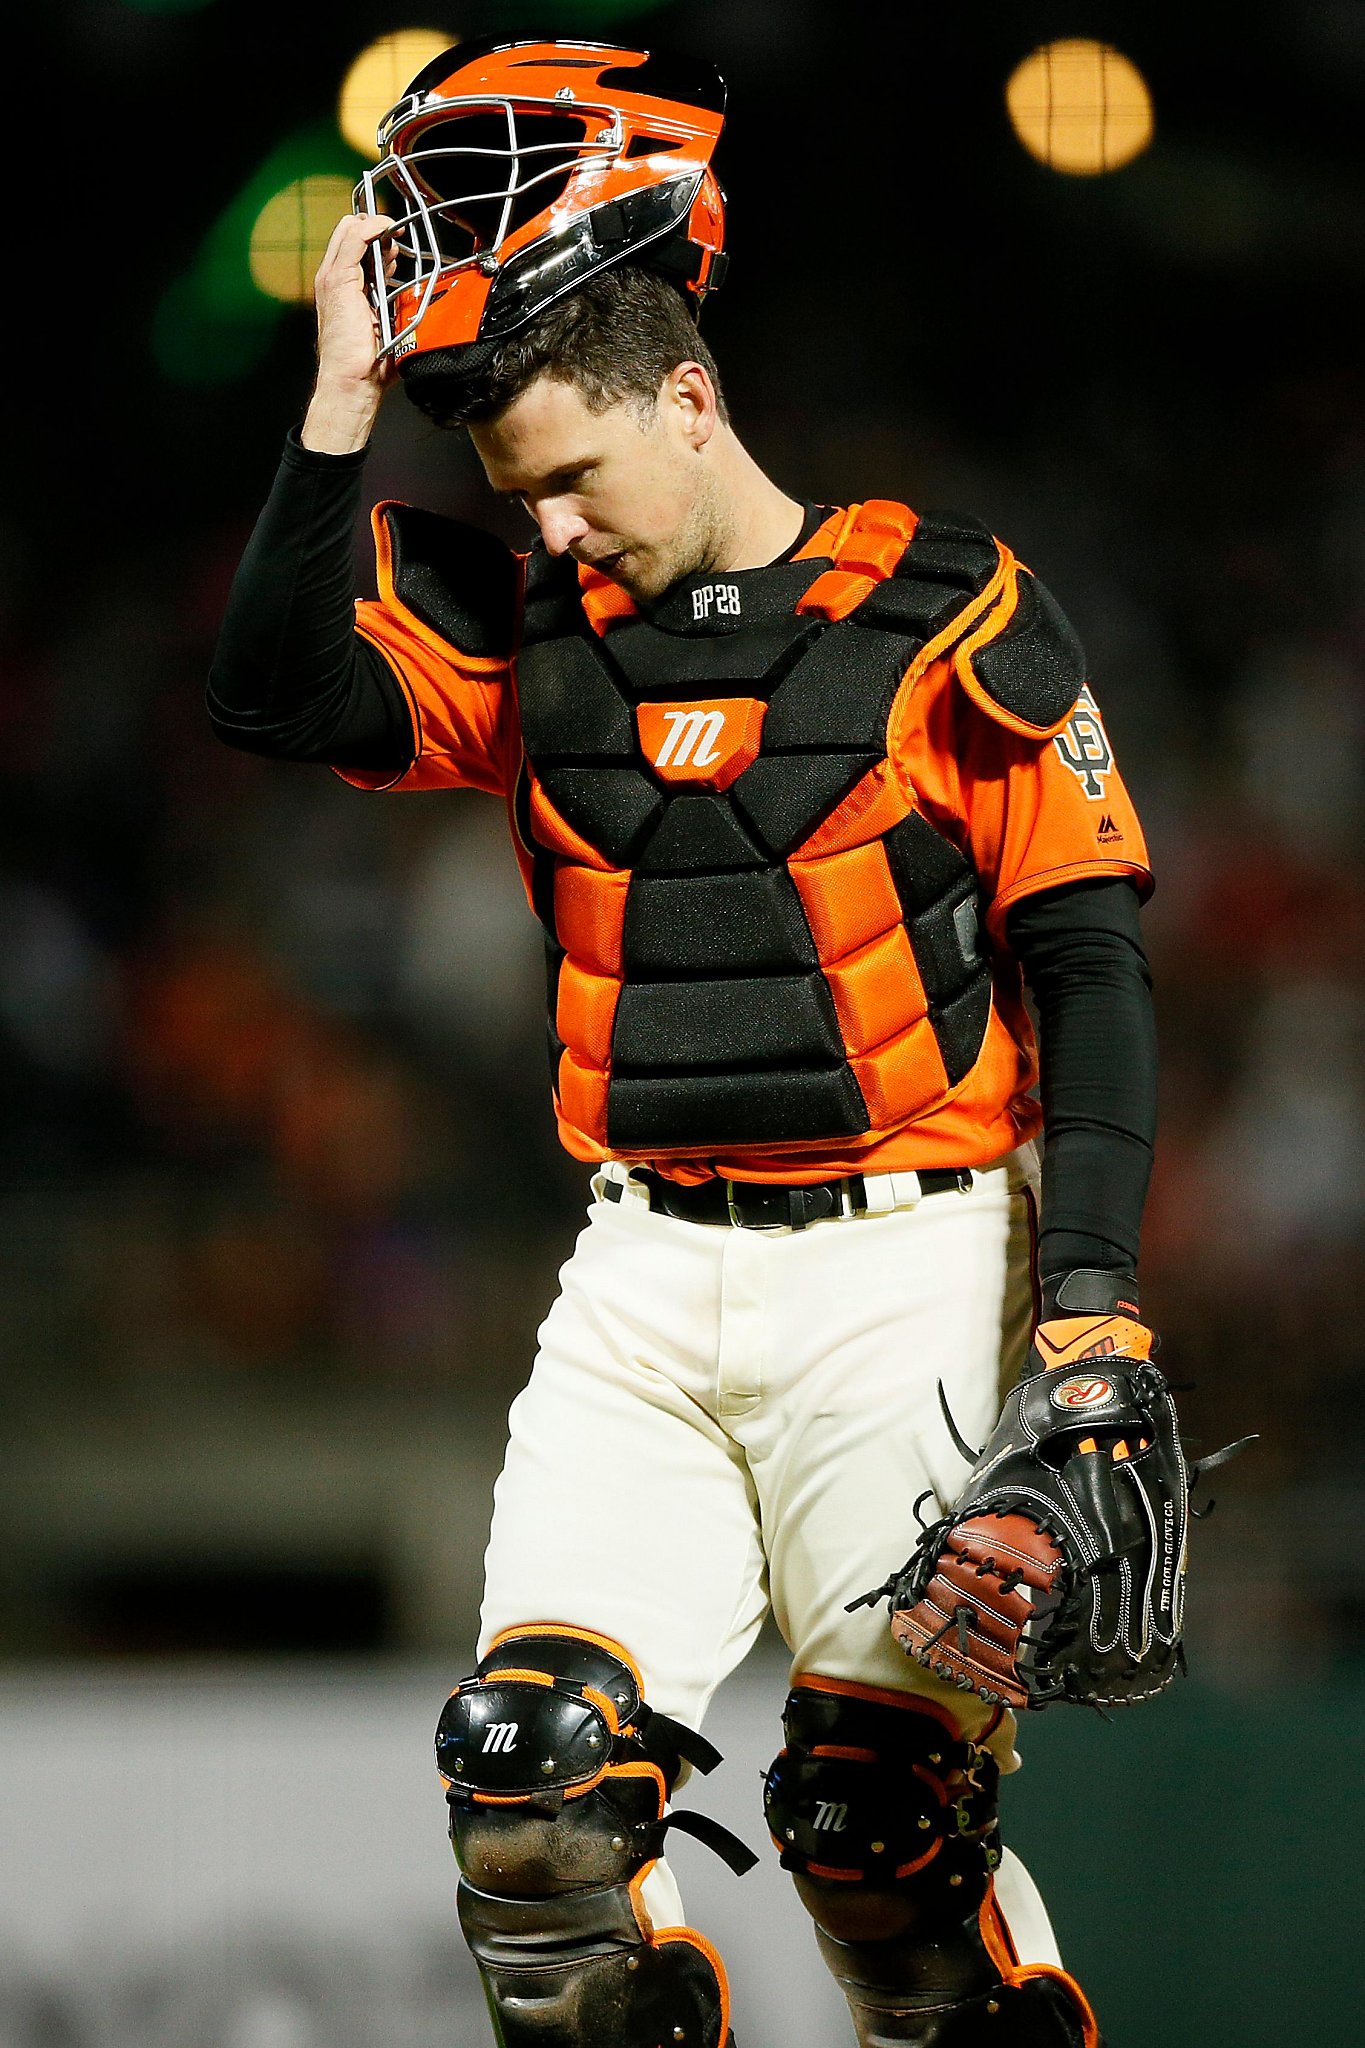 Buster Posey of the San Francisco Giants Wins Phi Delta Theta